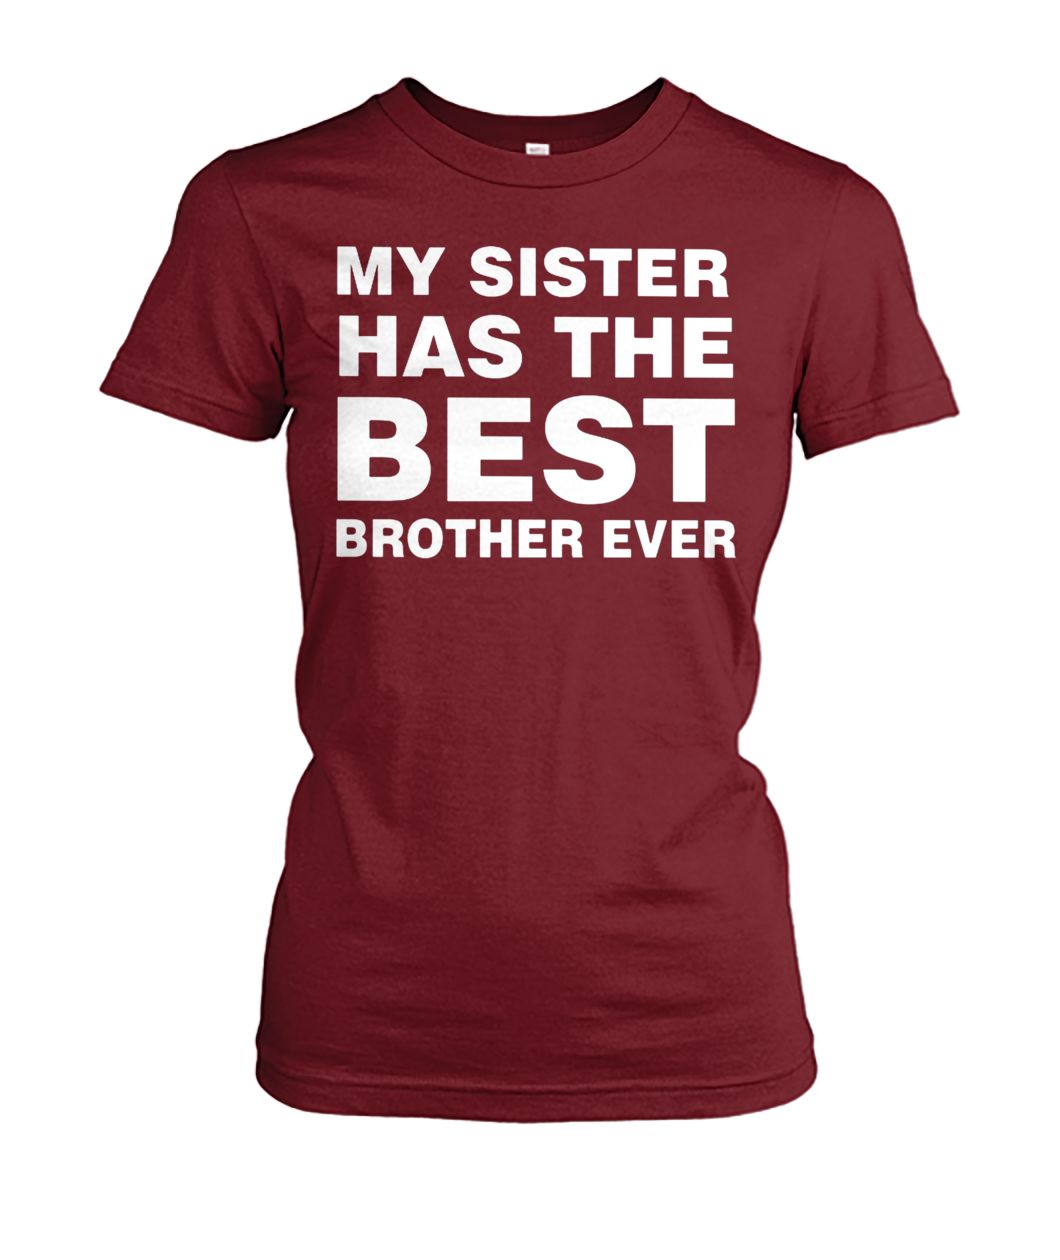 My sister has the best brother ever women's crew tee